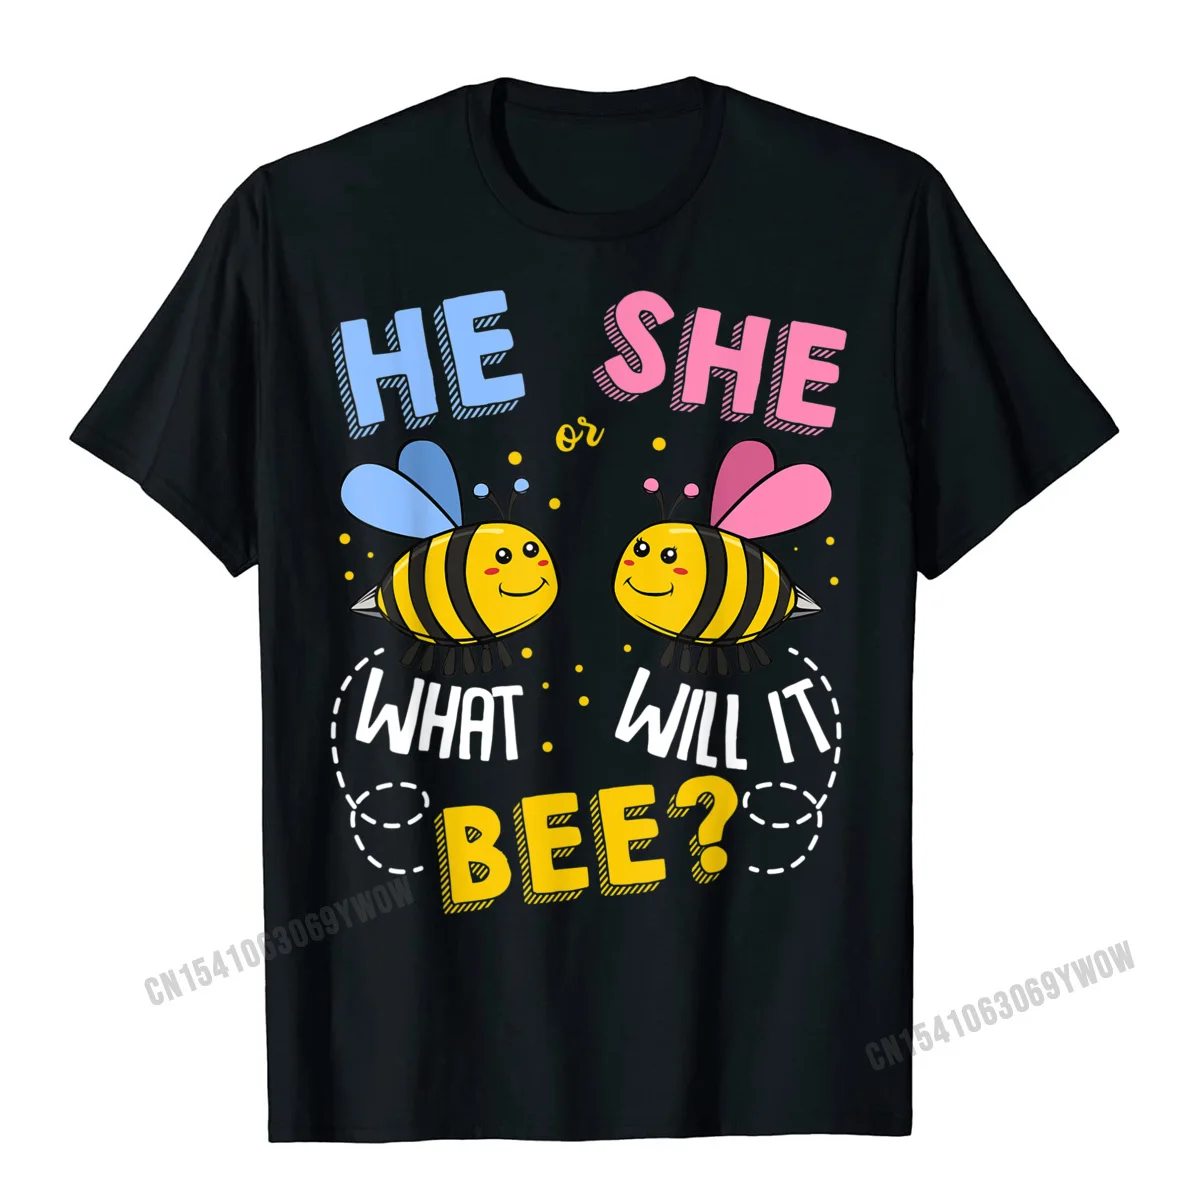 He Or She What Will It Bee Baby Party Gender Reveal Tshirt Top T-Shirts Funny New Coming Harajuku Tops Shirts Printed On For Men